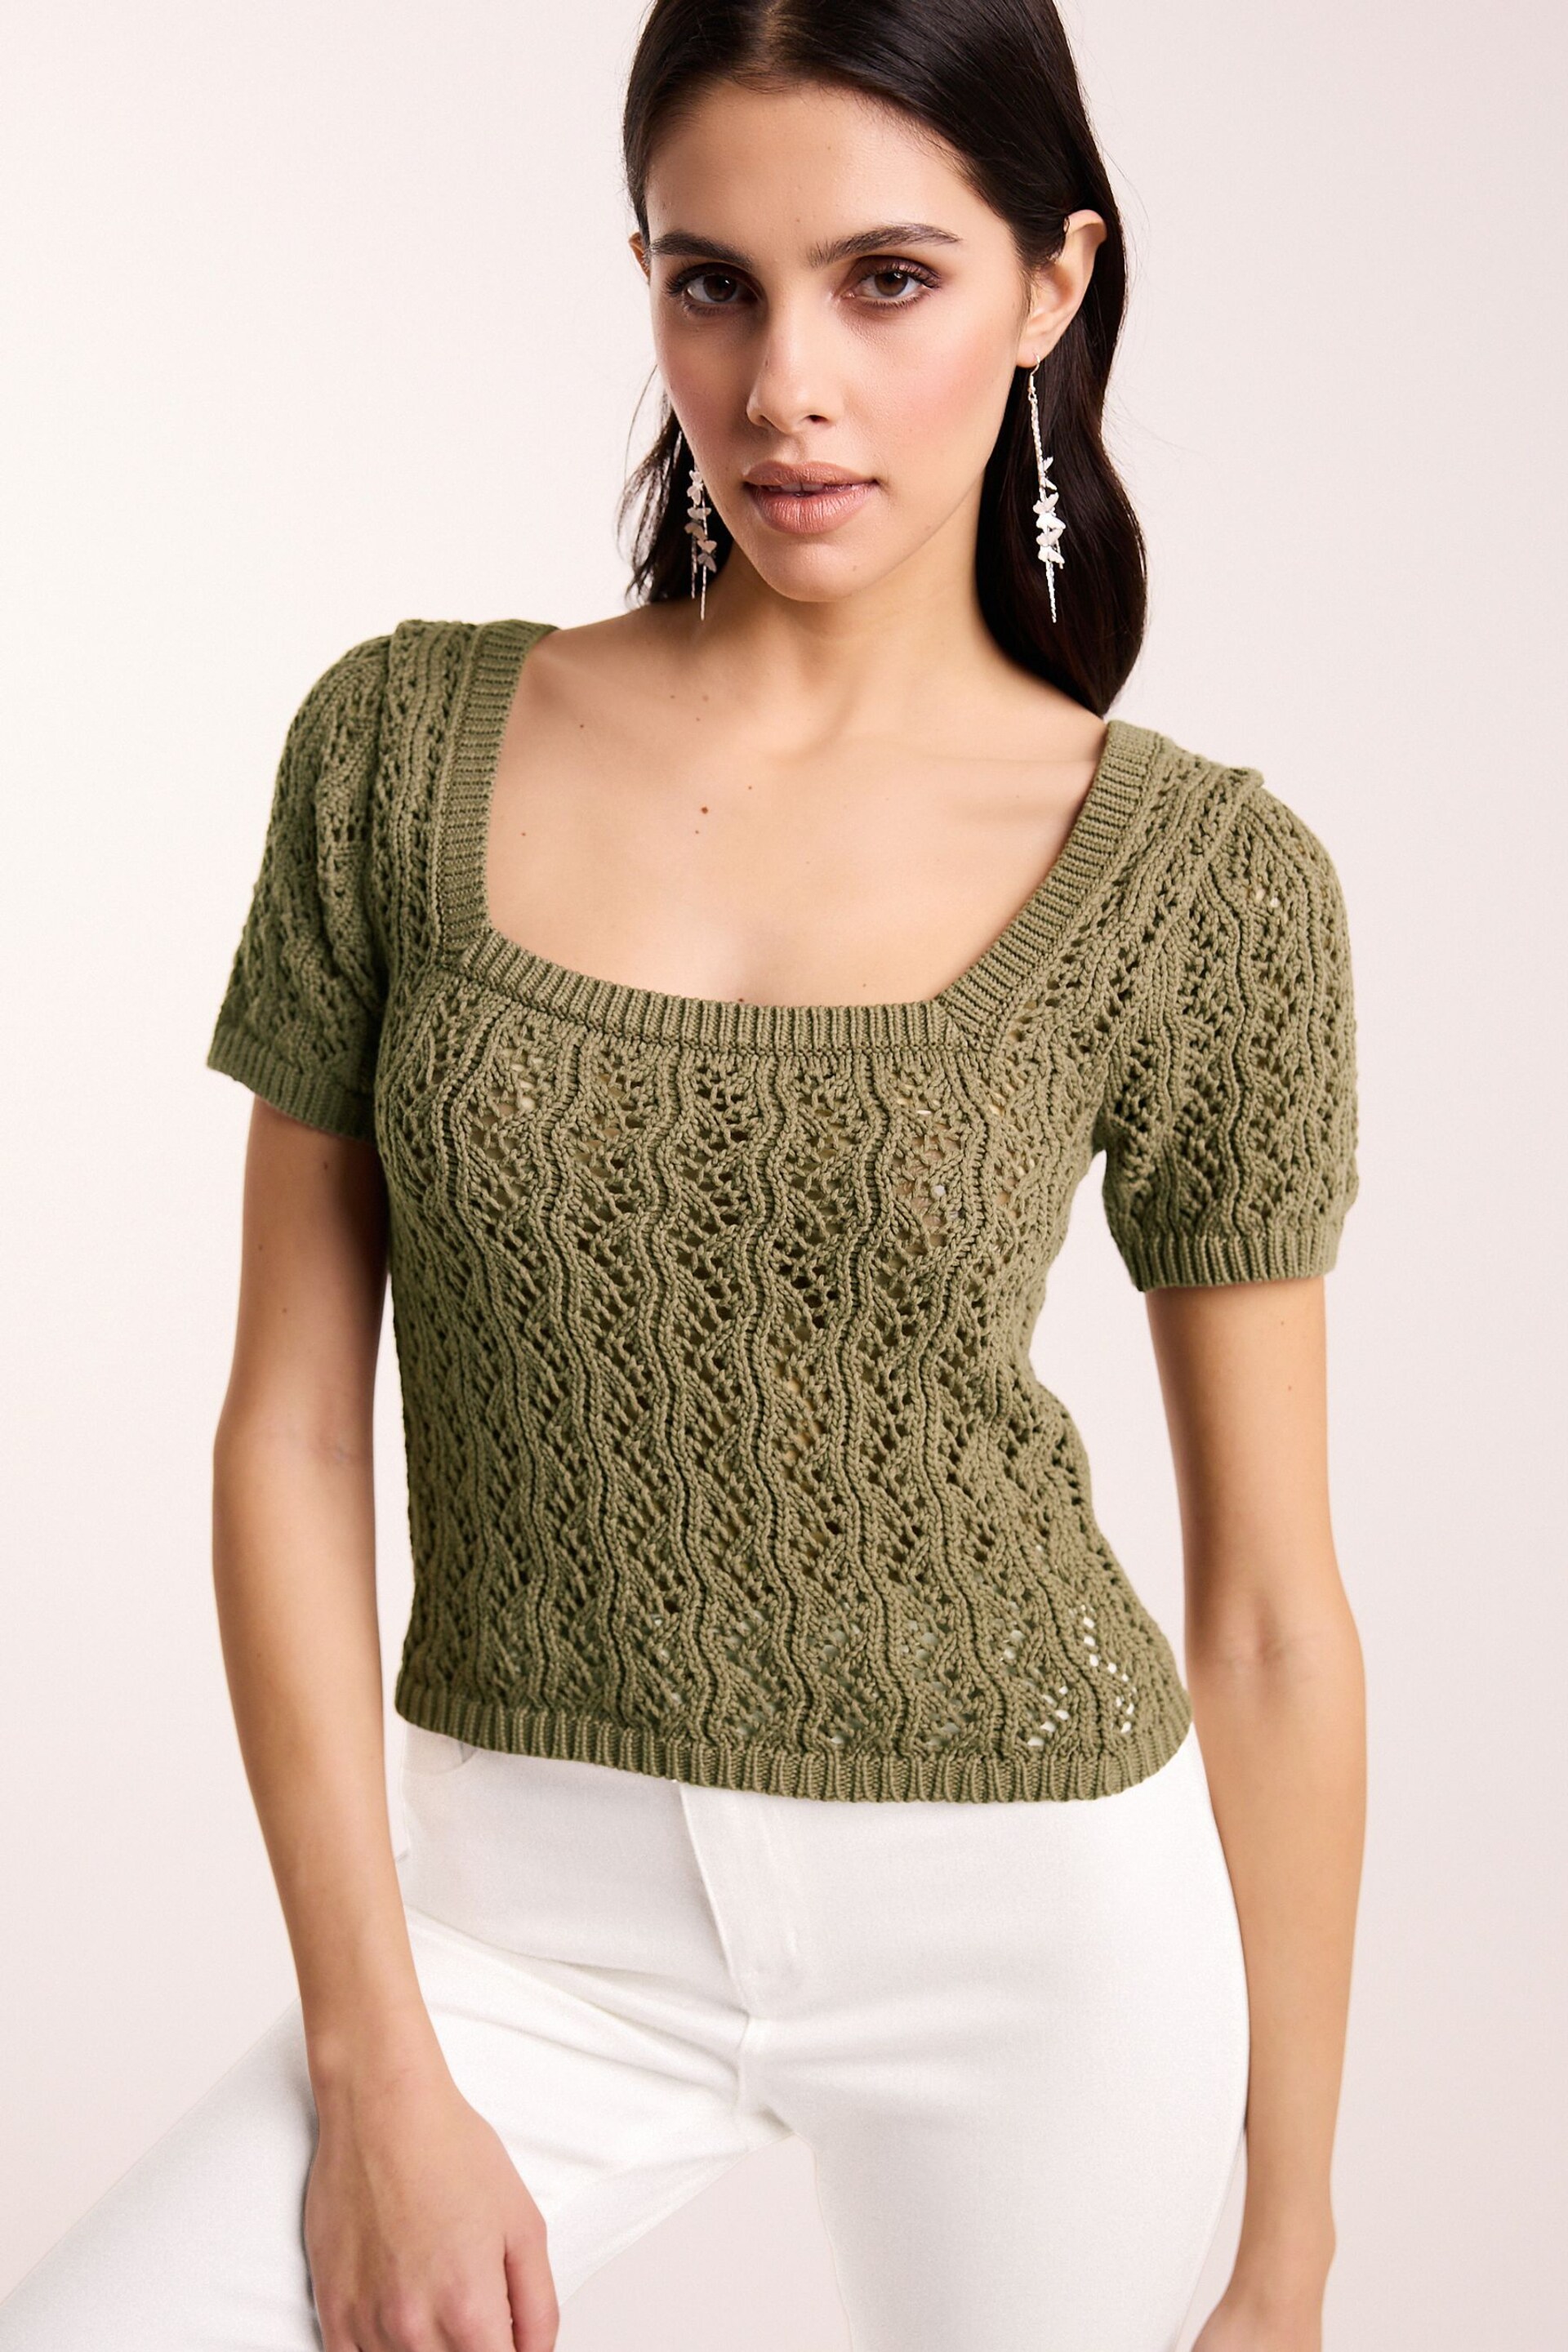 Khaki Green Square Neck Stitch Detail Short Sleeve Knitted Top - Image 1 of 6